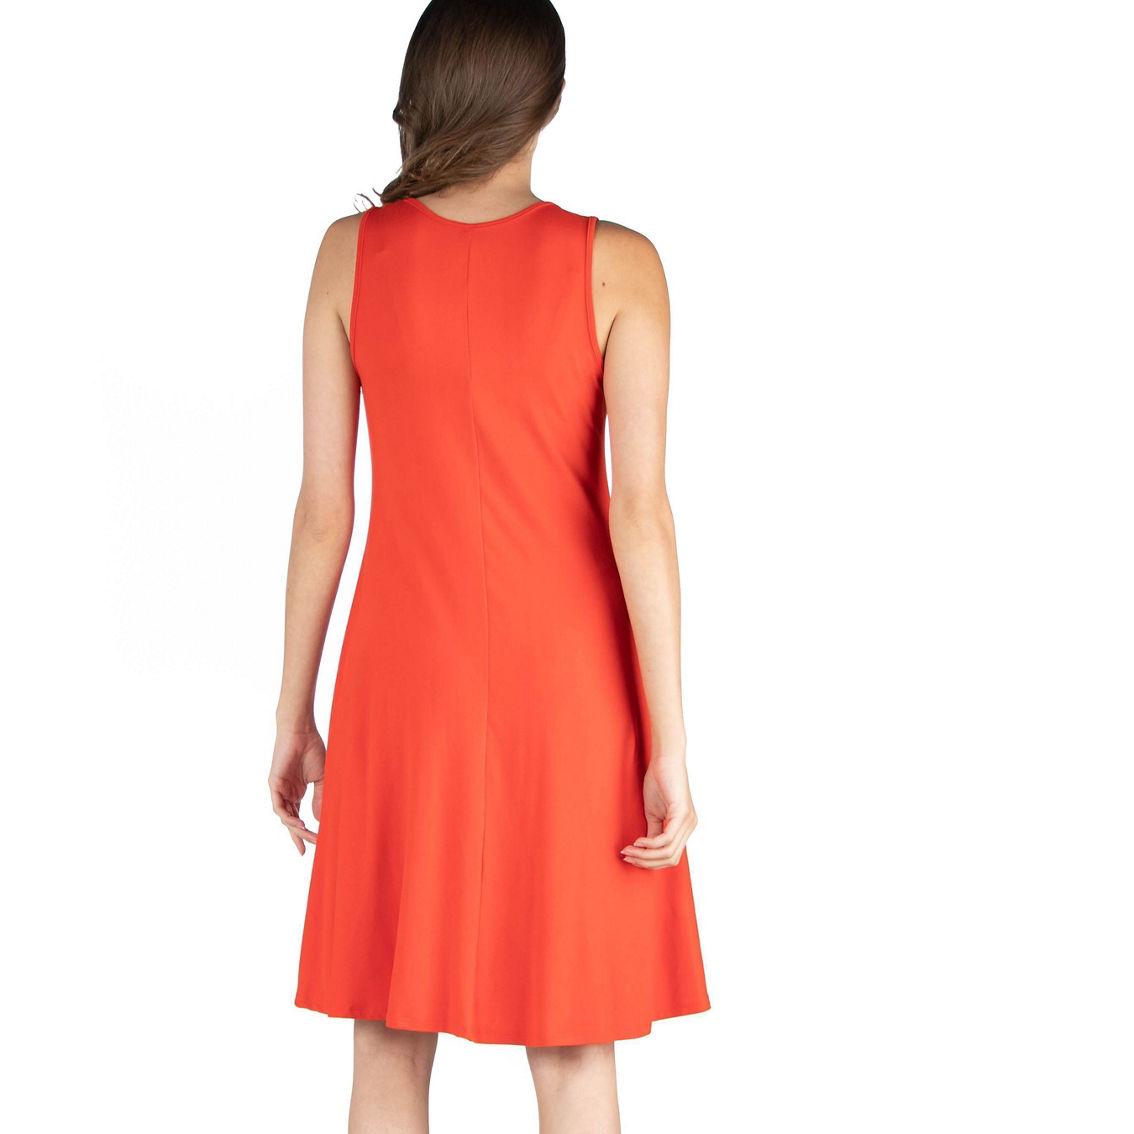 24seven Comfort Apparel Sleeveless A Line Fit and Flare Skater Dress - Image 3 of 4